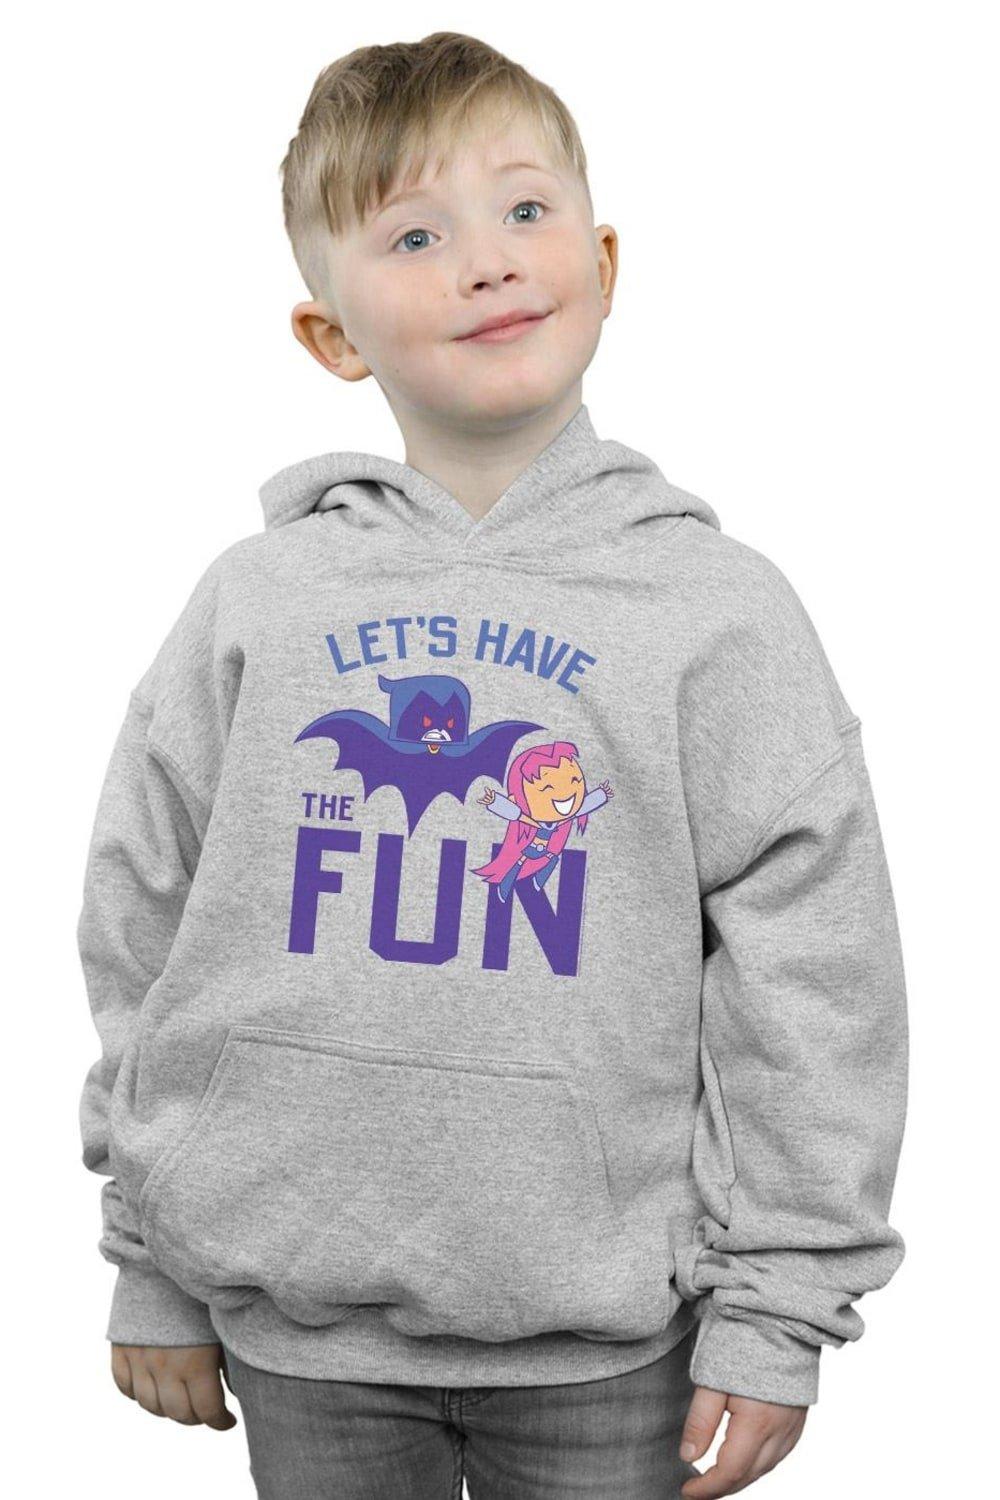 Teen Titans Go Let’s Have The Fun Hoodie